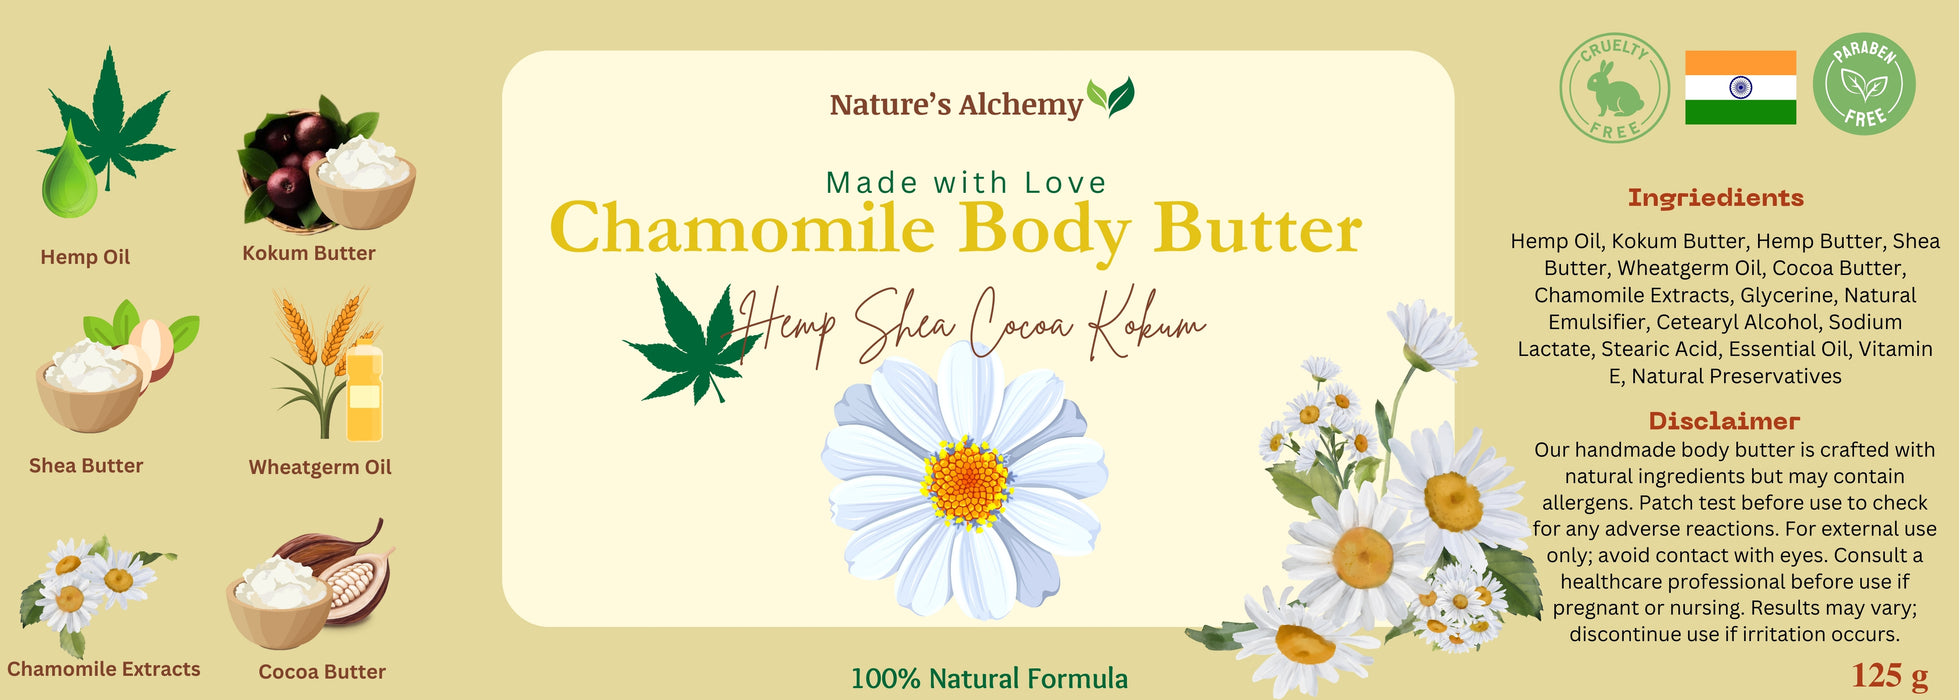 Nature's Alchemy Chamomile Body Butter with Hemp Oil, Kokum, Shea & Cocoa Butter